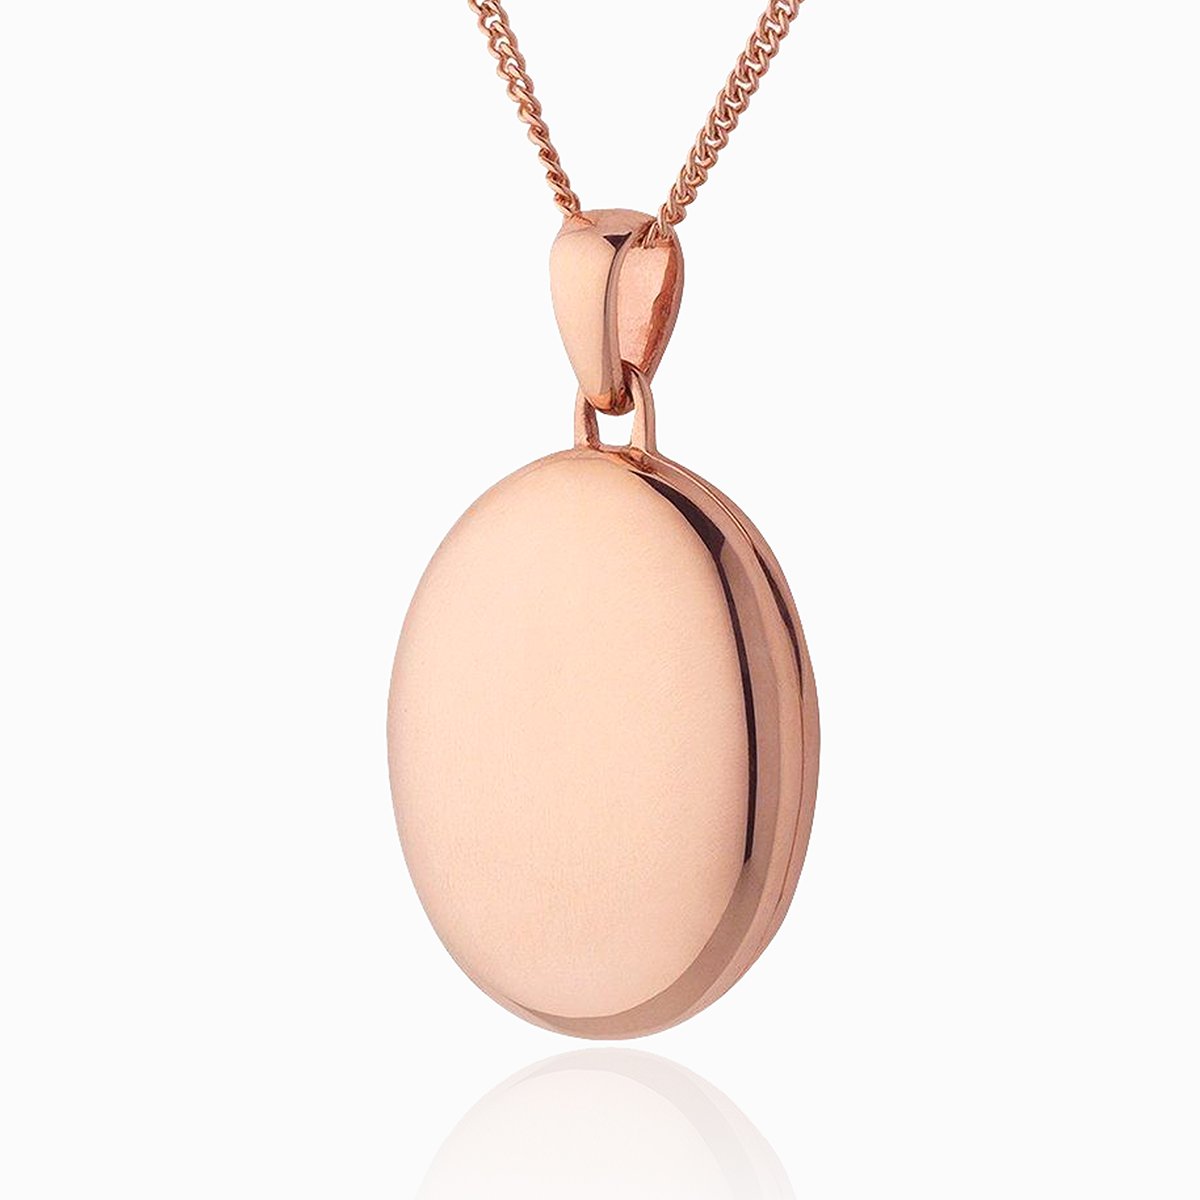 Front shot of a 9 ct rose gold oval locket on a 9 ct rose gold curb chain.